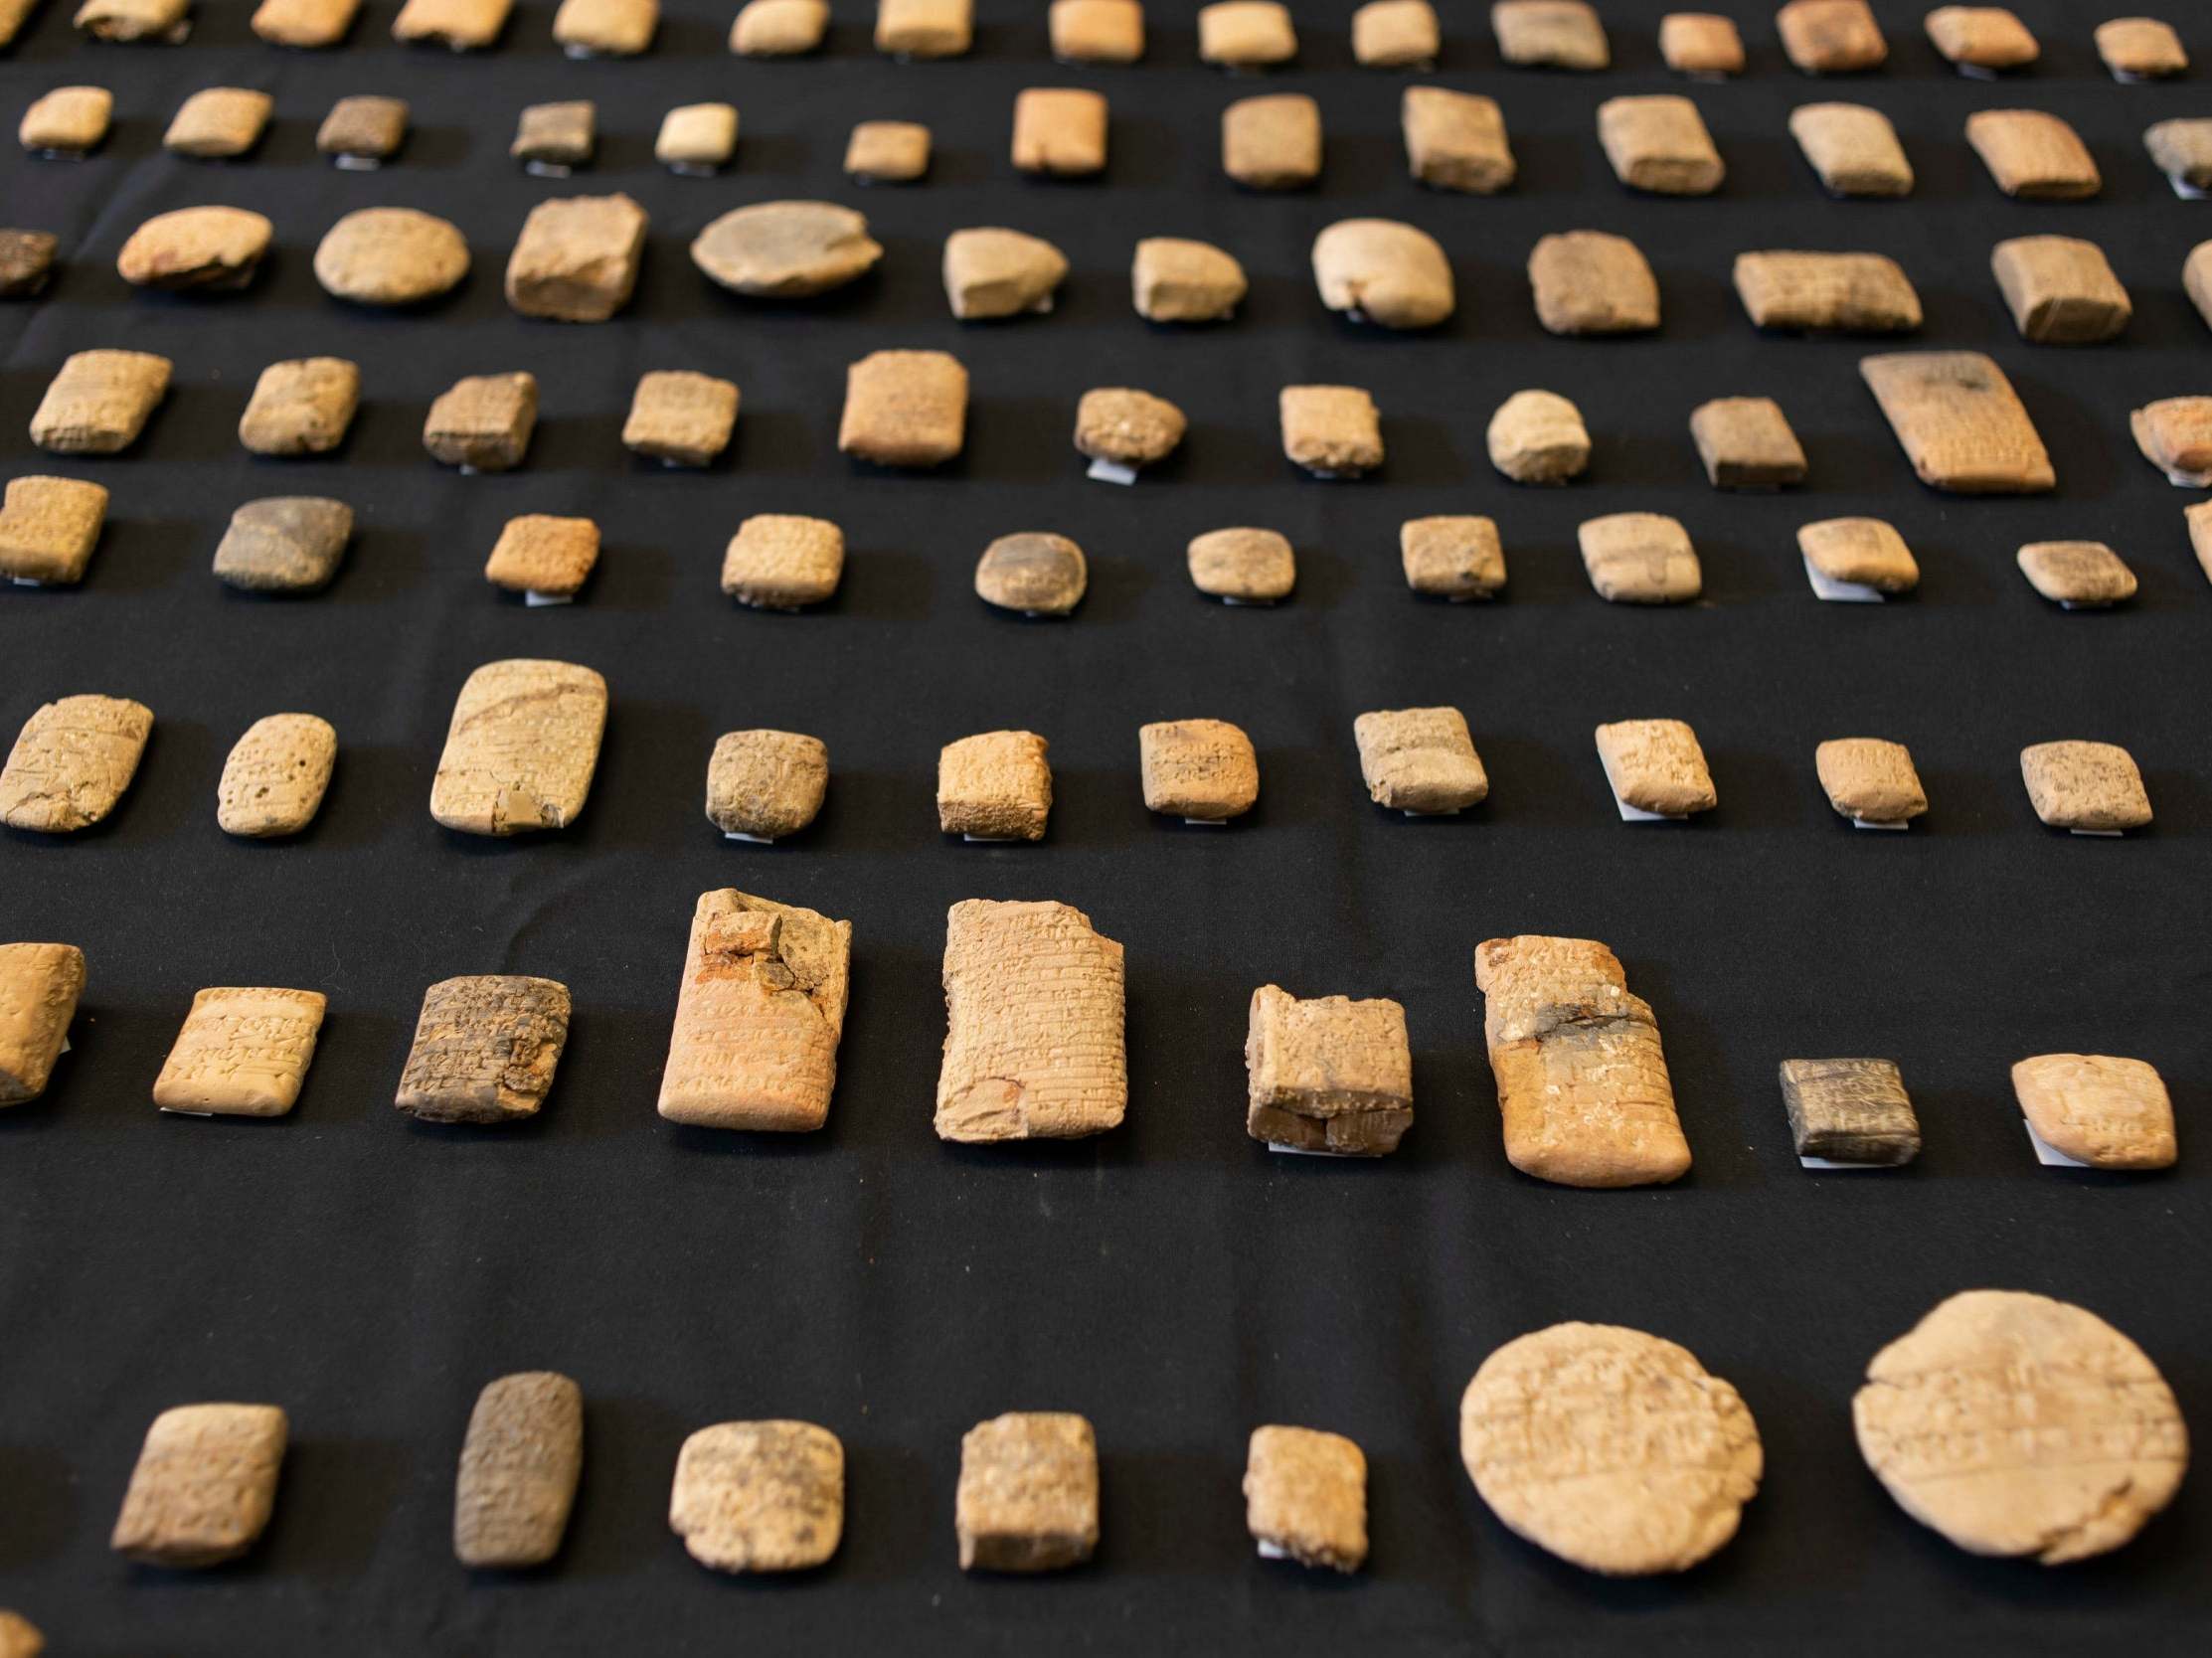 Tablets bearing cuneiform, one of the earliest systems of writing, will be returned to Iraq